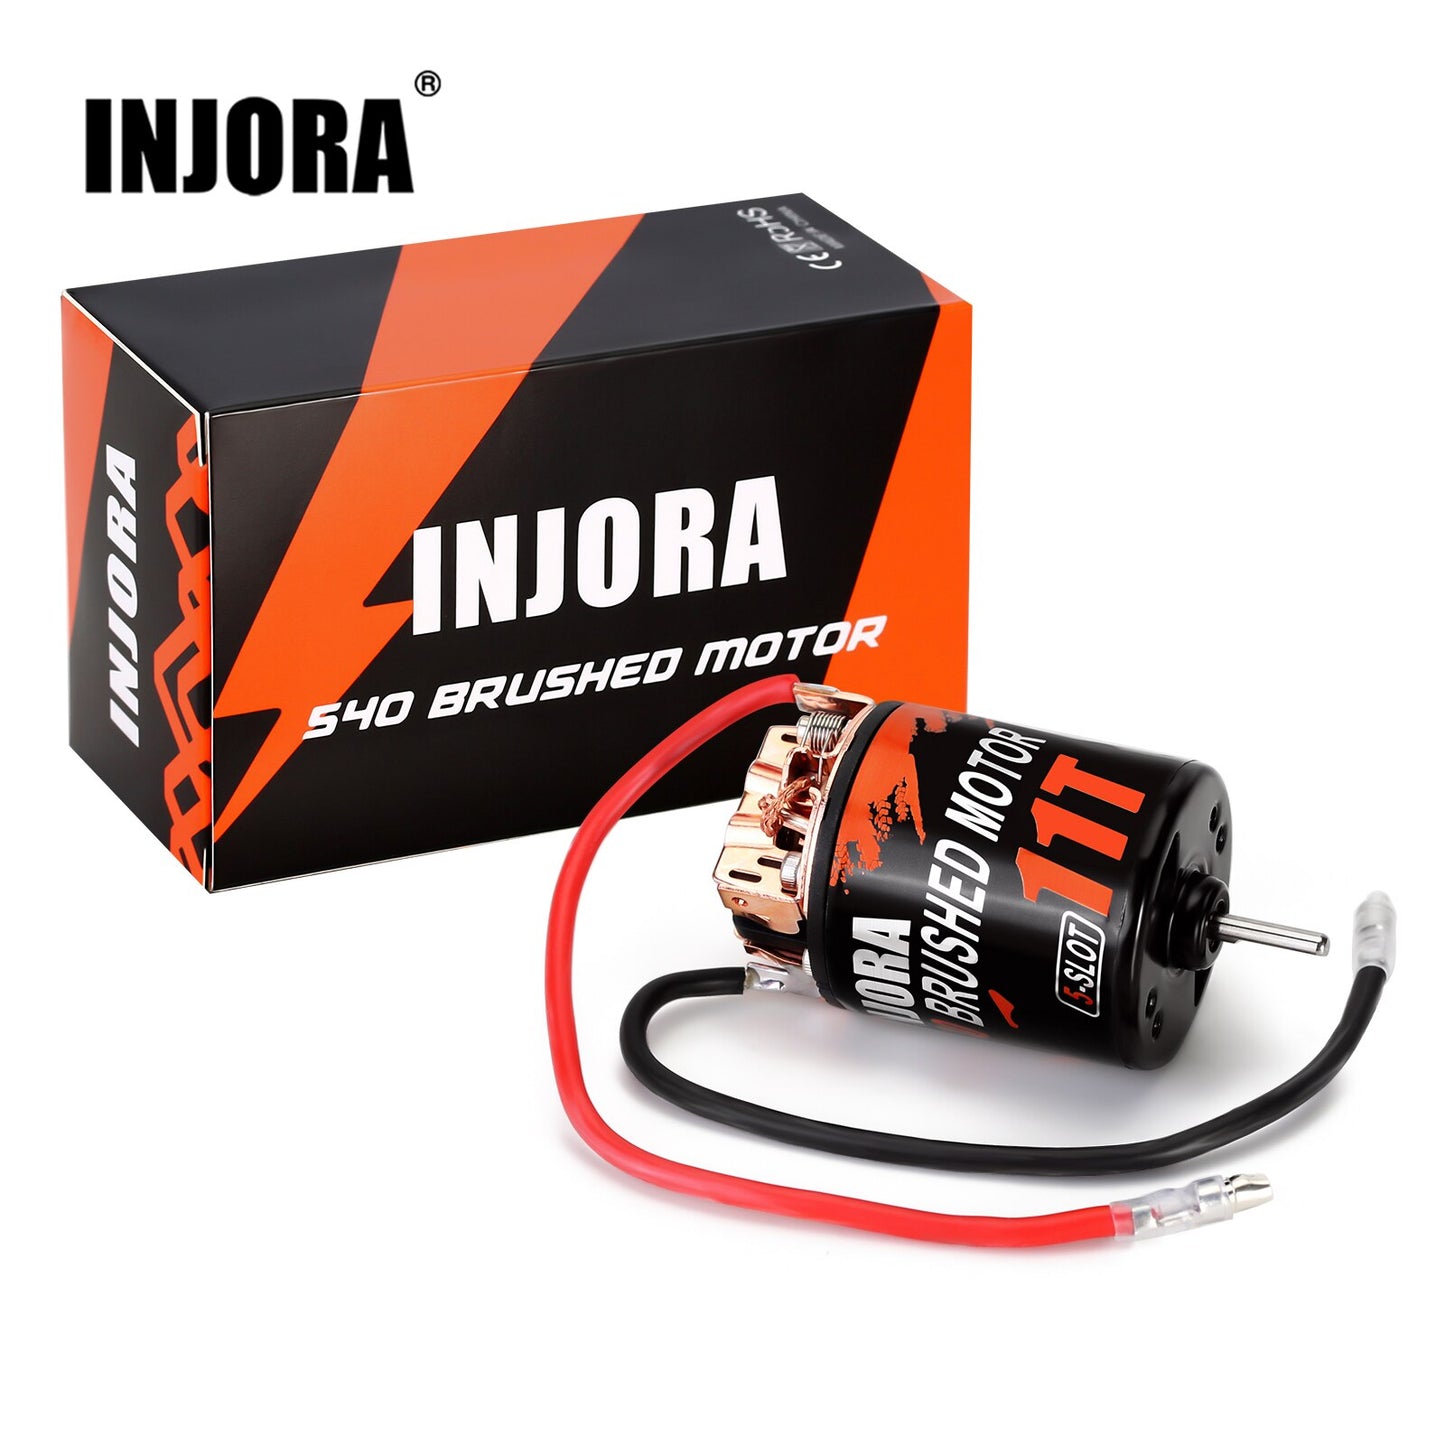 INJORA Waterproof 5-SLOT 540 Brushed Motor 11T 14T 19T 28T 33T for 1:10 Scale RC Model Car Crawler Truck Buggy (INM10)